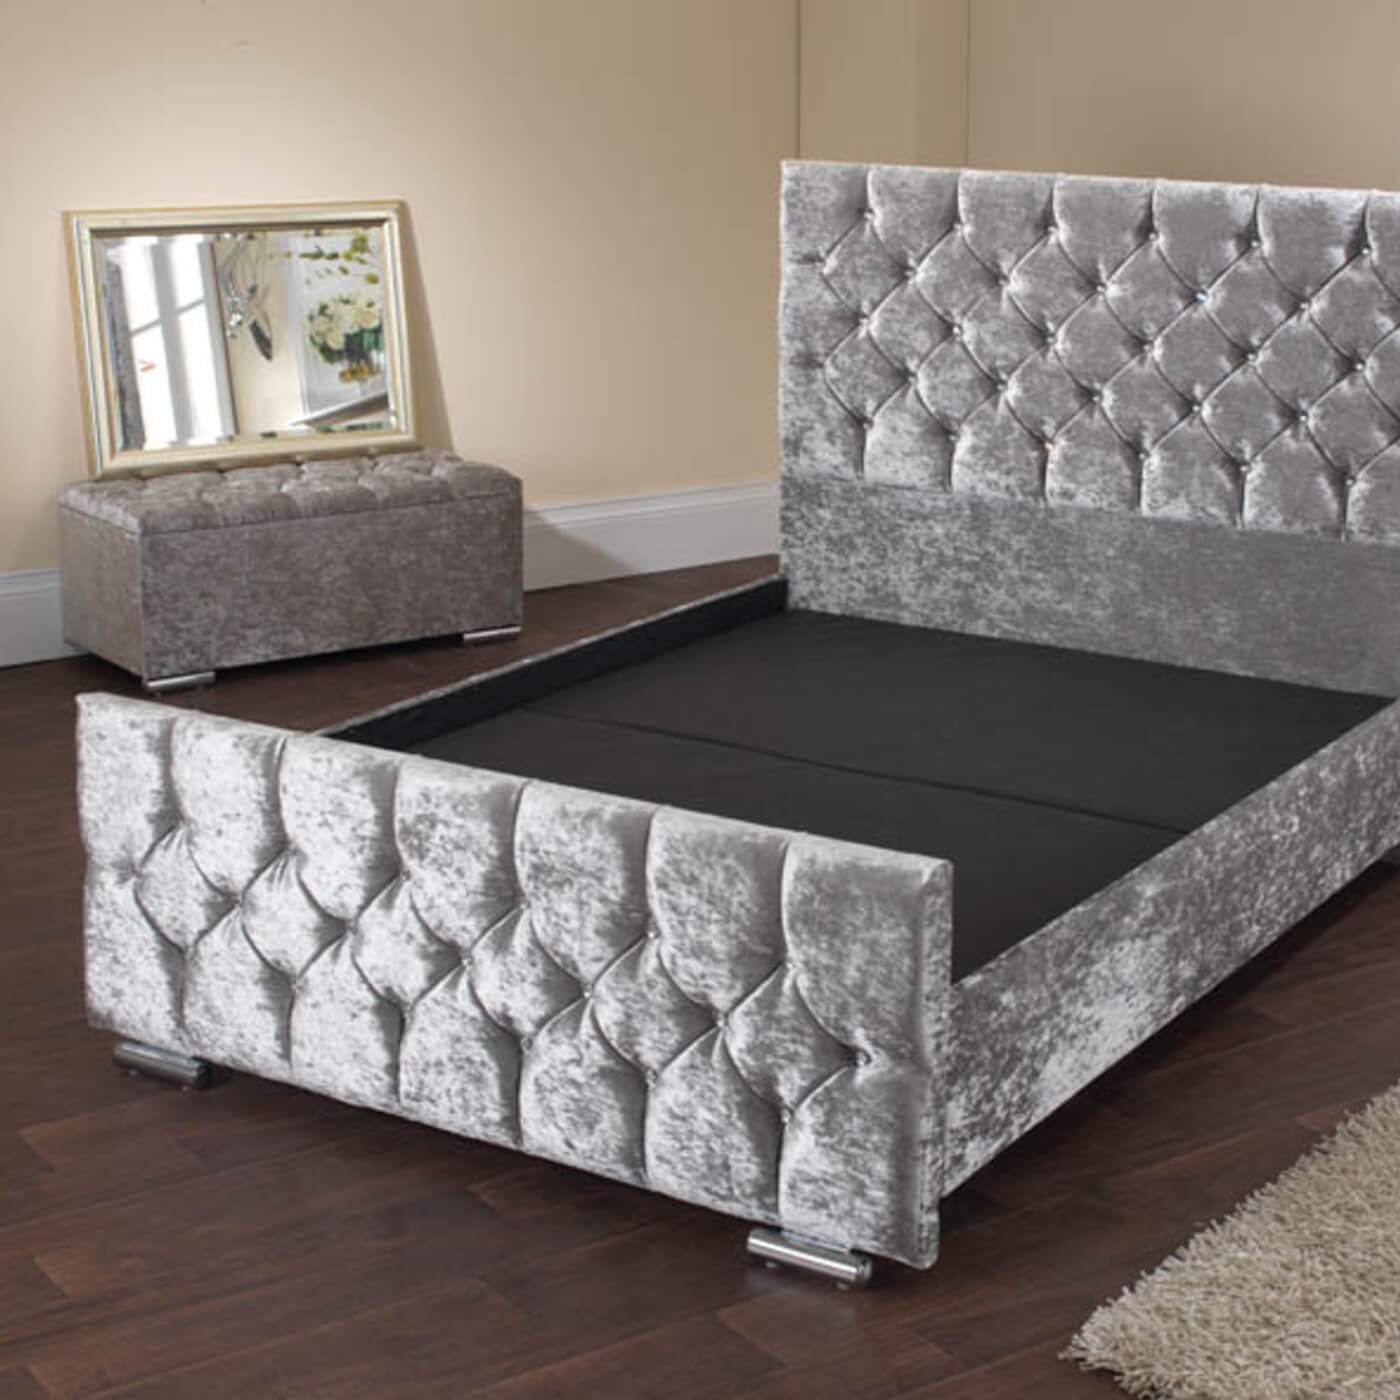 Diamond Bed Frame North West Beds